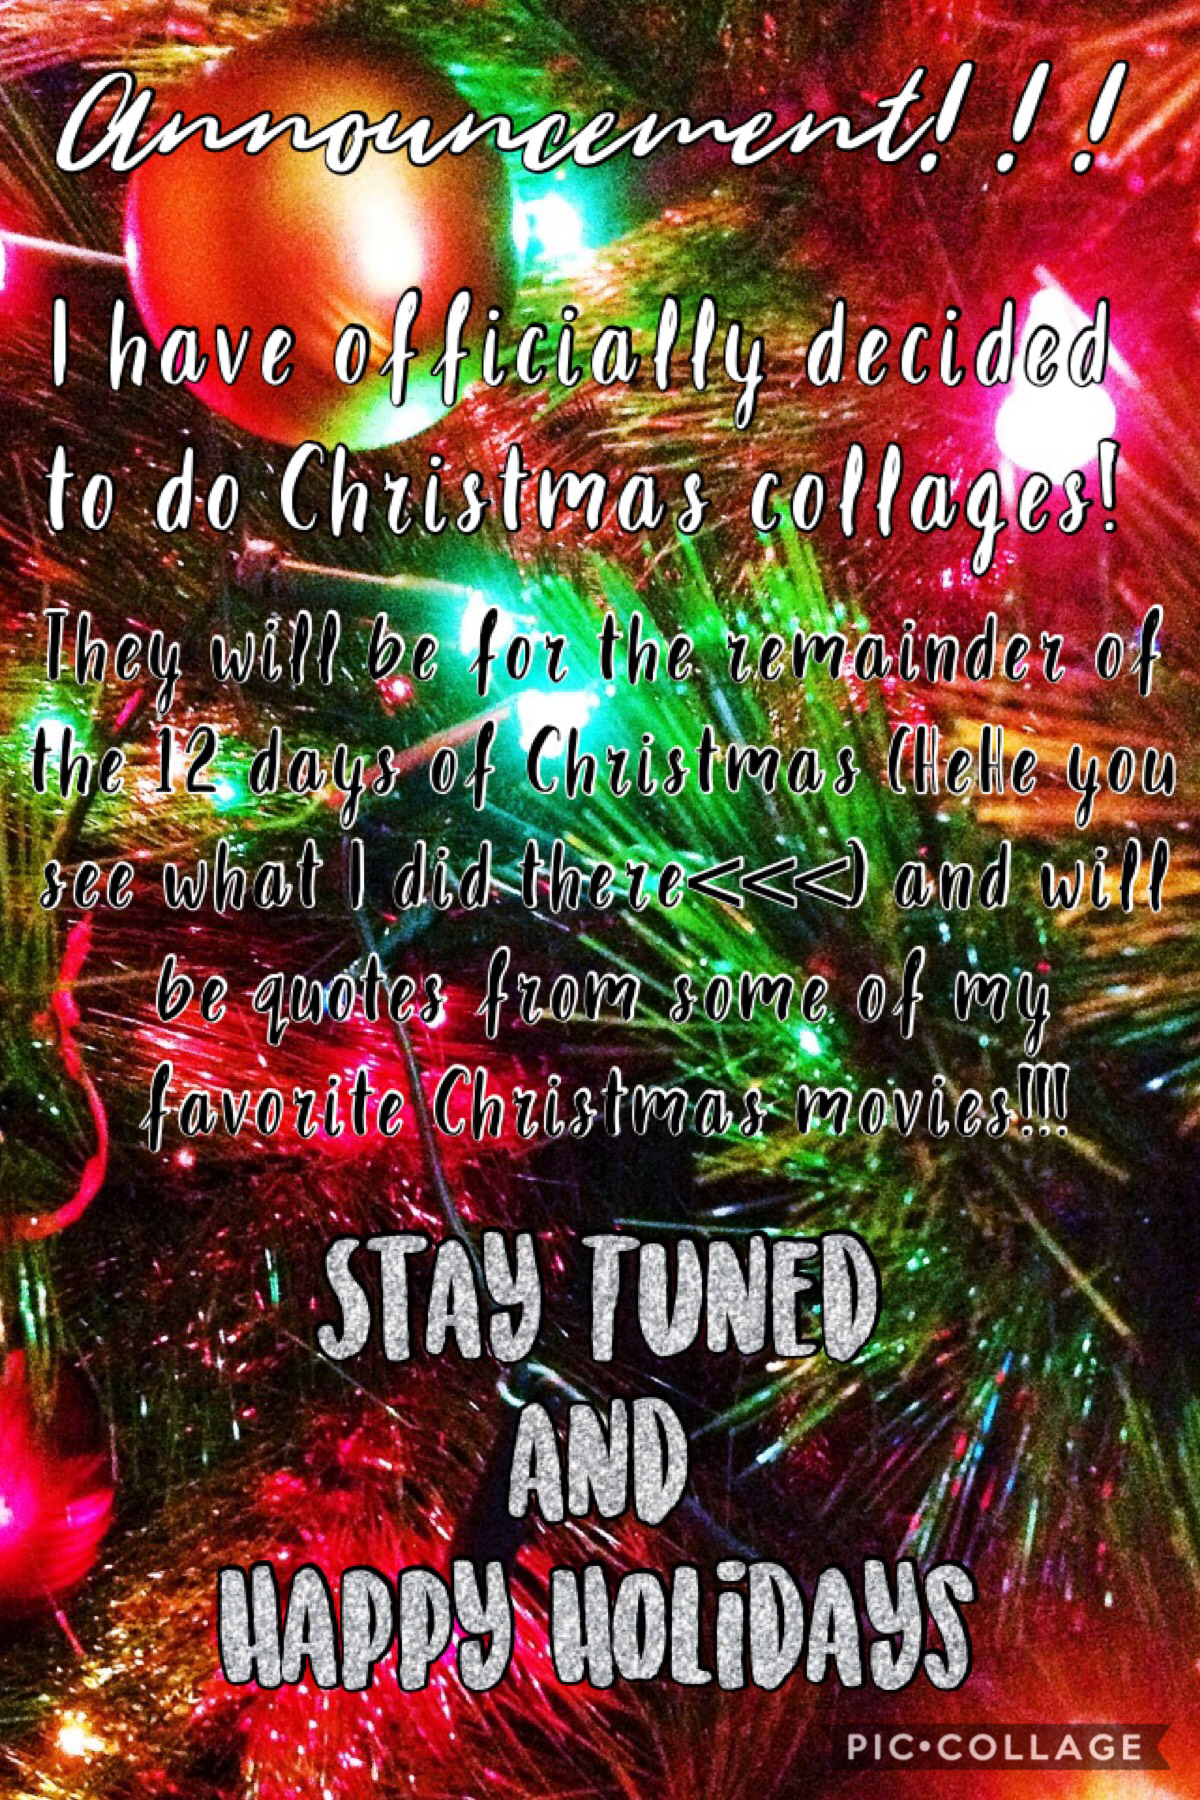 Tap>🎄
ANNOUNCEMENT!!!
Christmas collages coming soon...stay tuned!
(12/13/19)